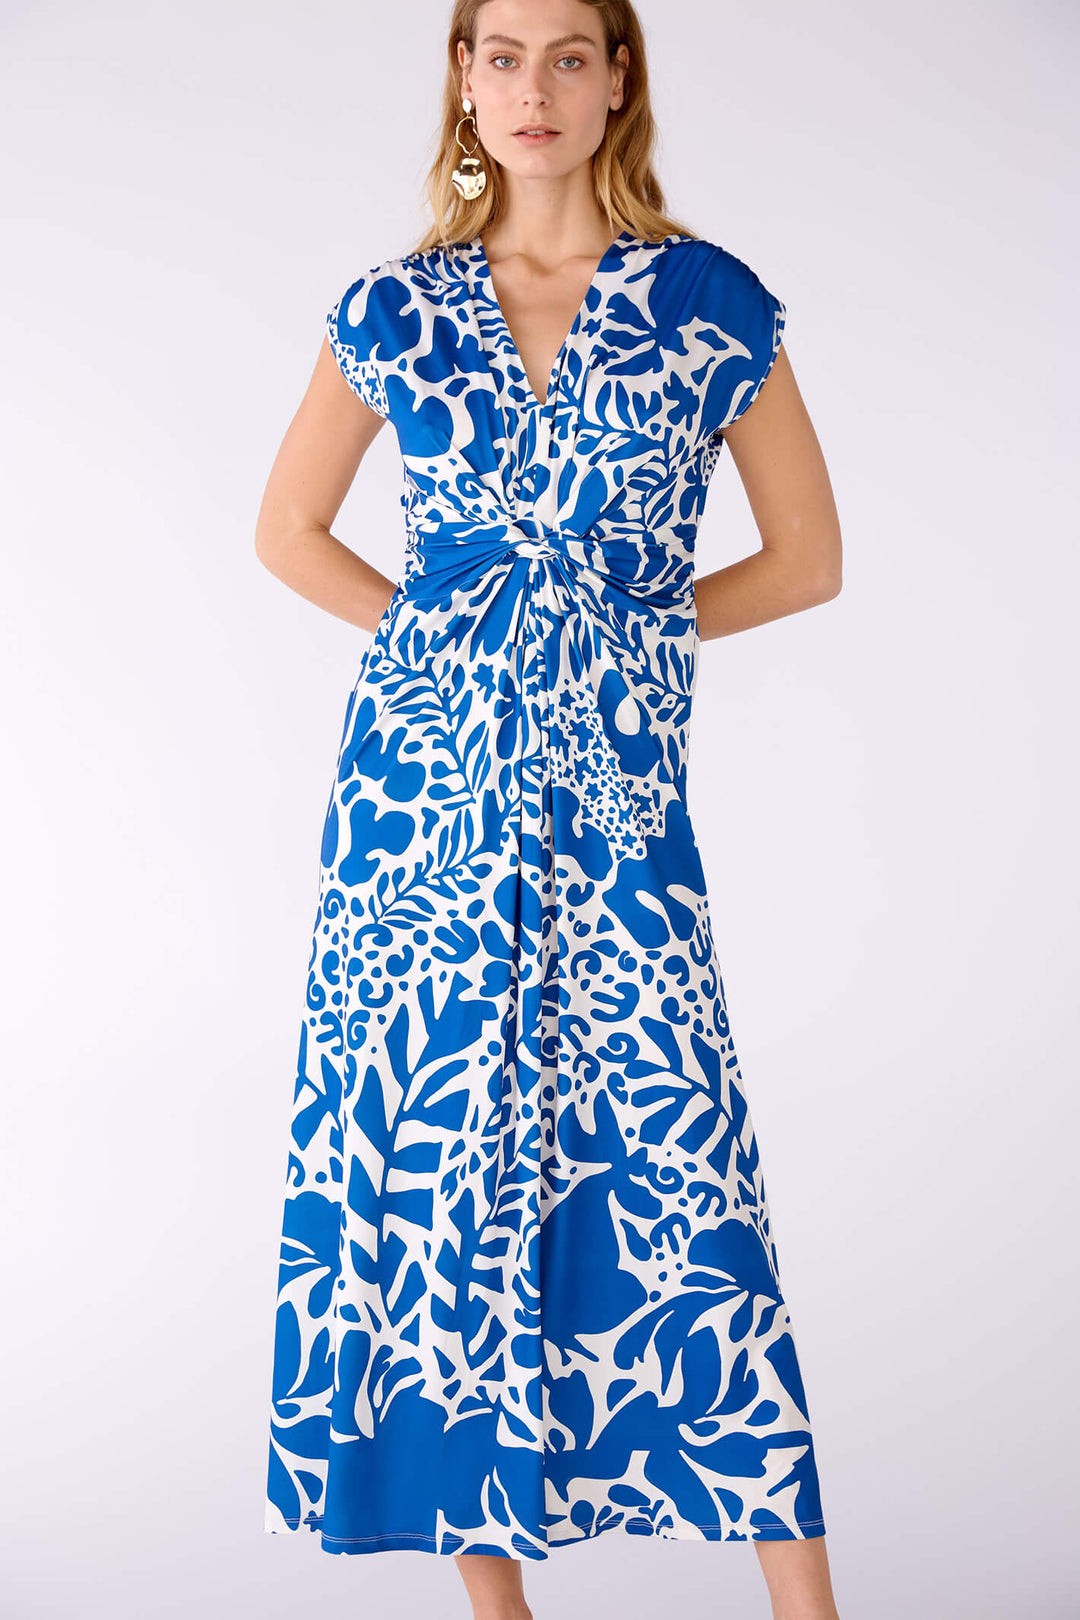 Oui 78549 Blue White Print Knotted Front Maxi Dress - Shirley Allum Boutique